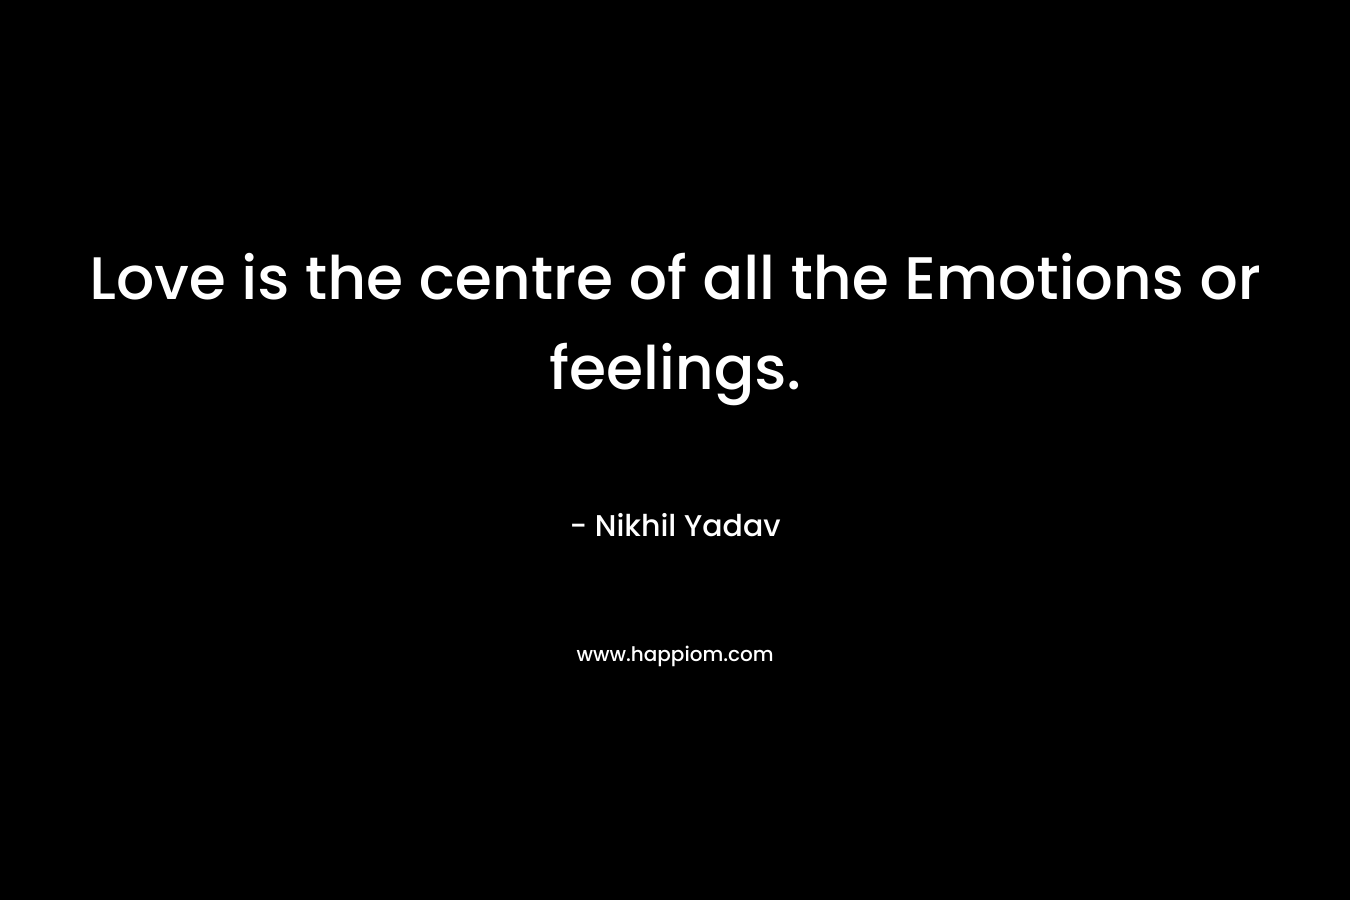 Love is the centre of all the Emotions or feelings.